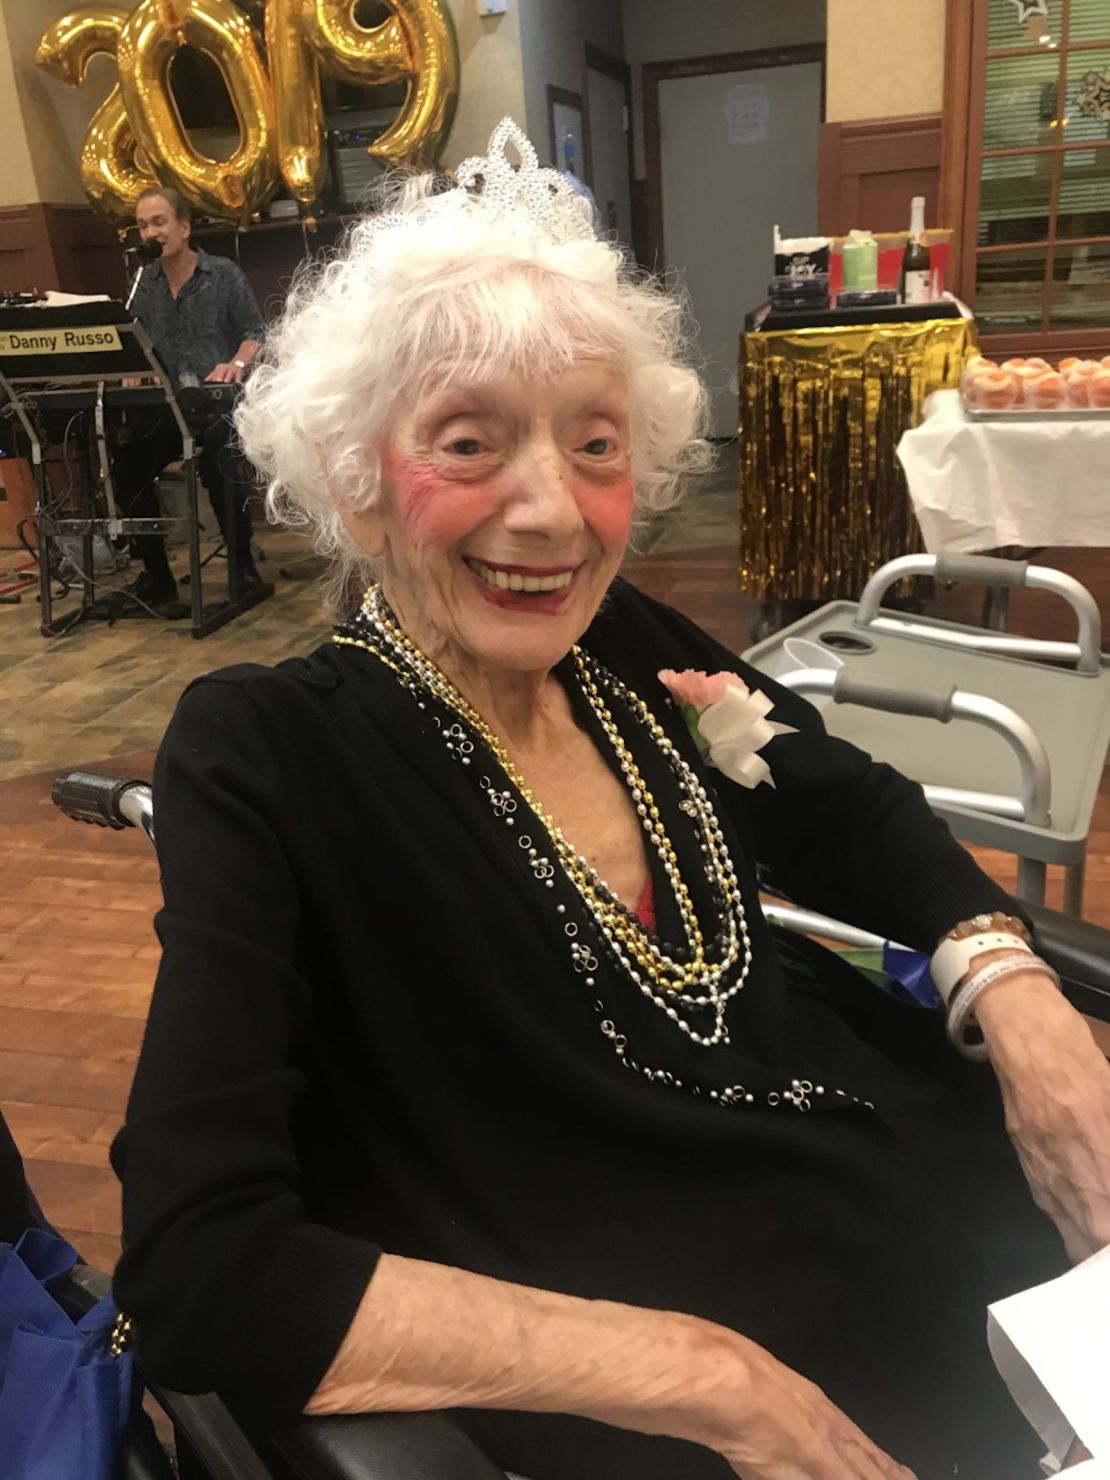 Friedman was named Prom Queen at the nursing home.